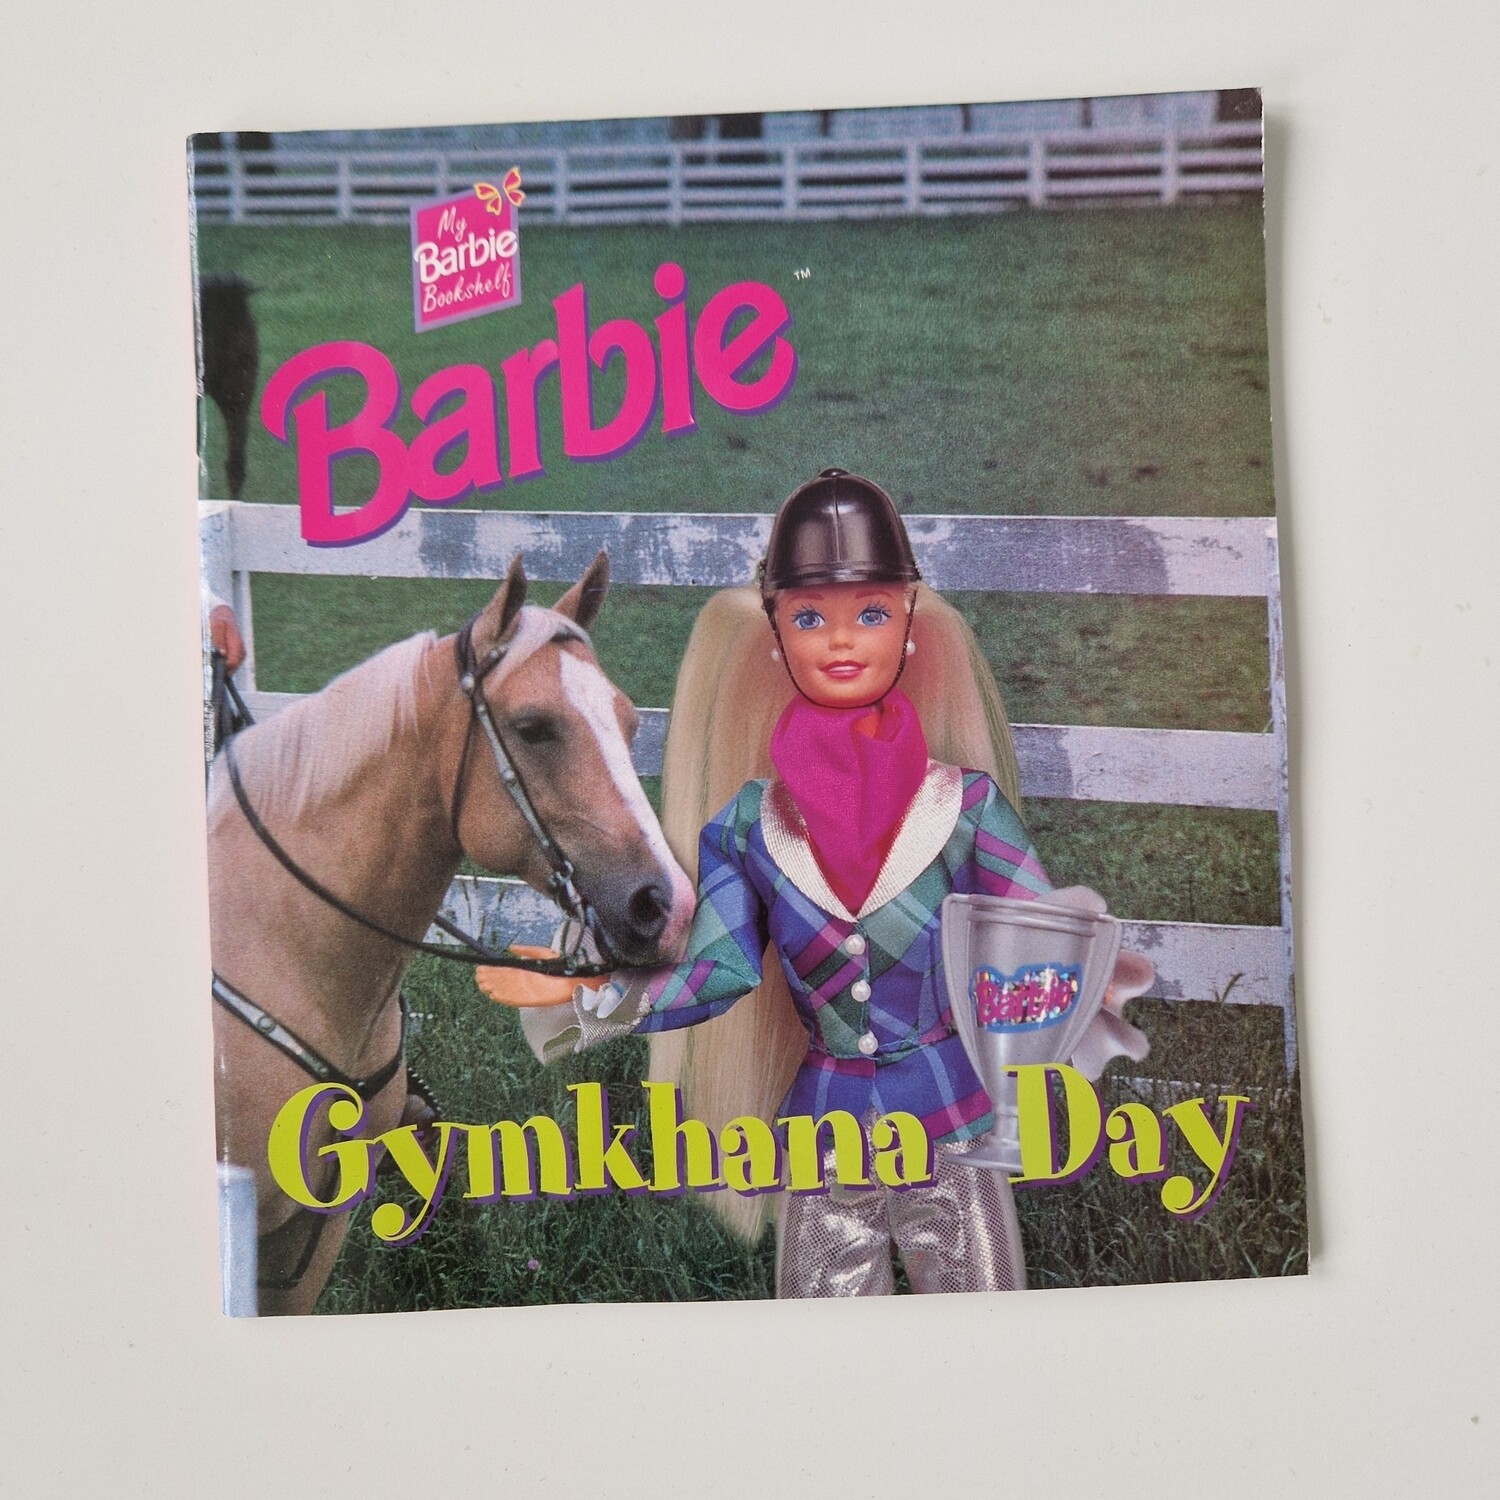 Barbie - Gymkhana Day Notebook - made from a paperback book - no original book pages